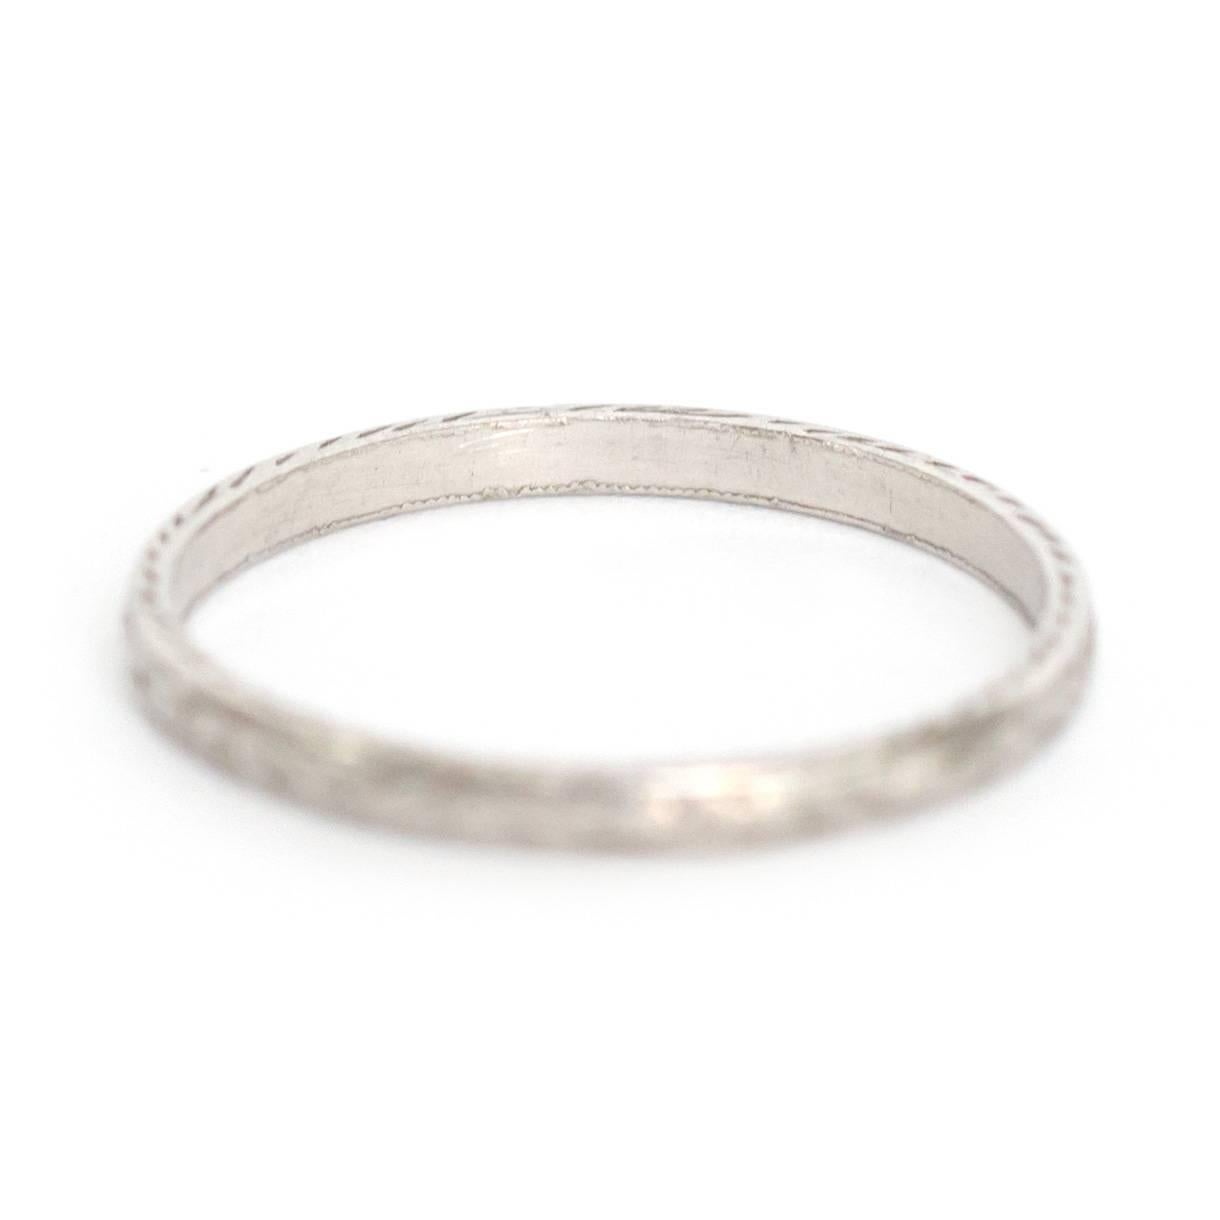 Item Details: 
Ring Size: 5.75
Metal Type: Platinum
Weight: 1.7 grams

Finger to Top of Stone Measurement: .97mm